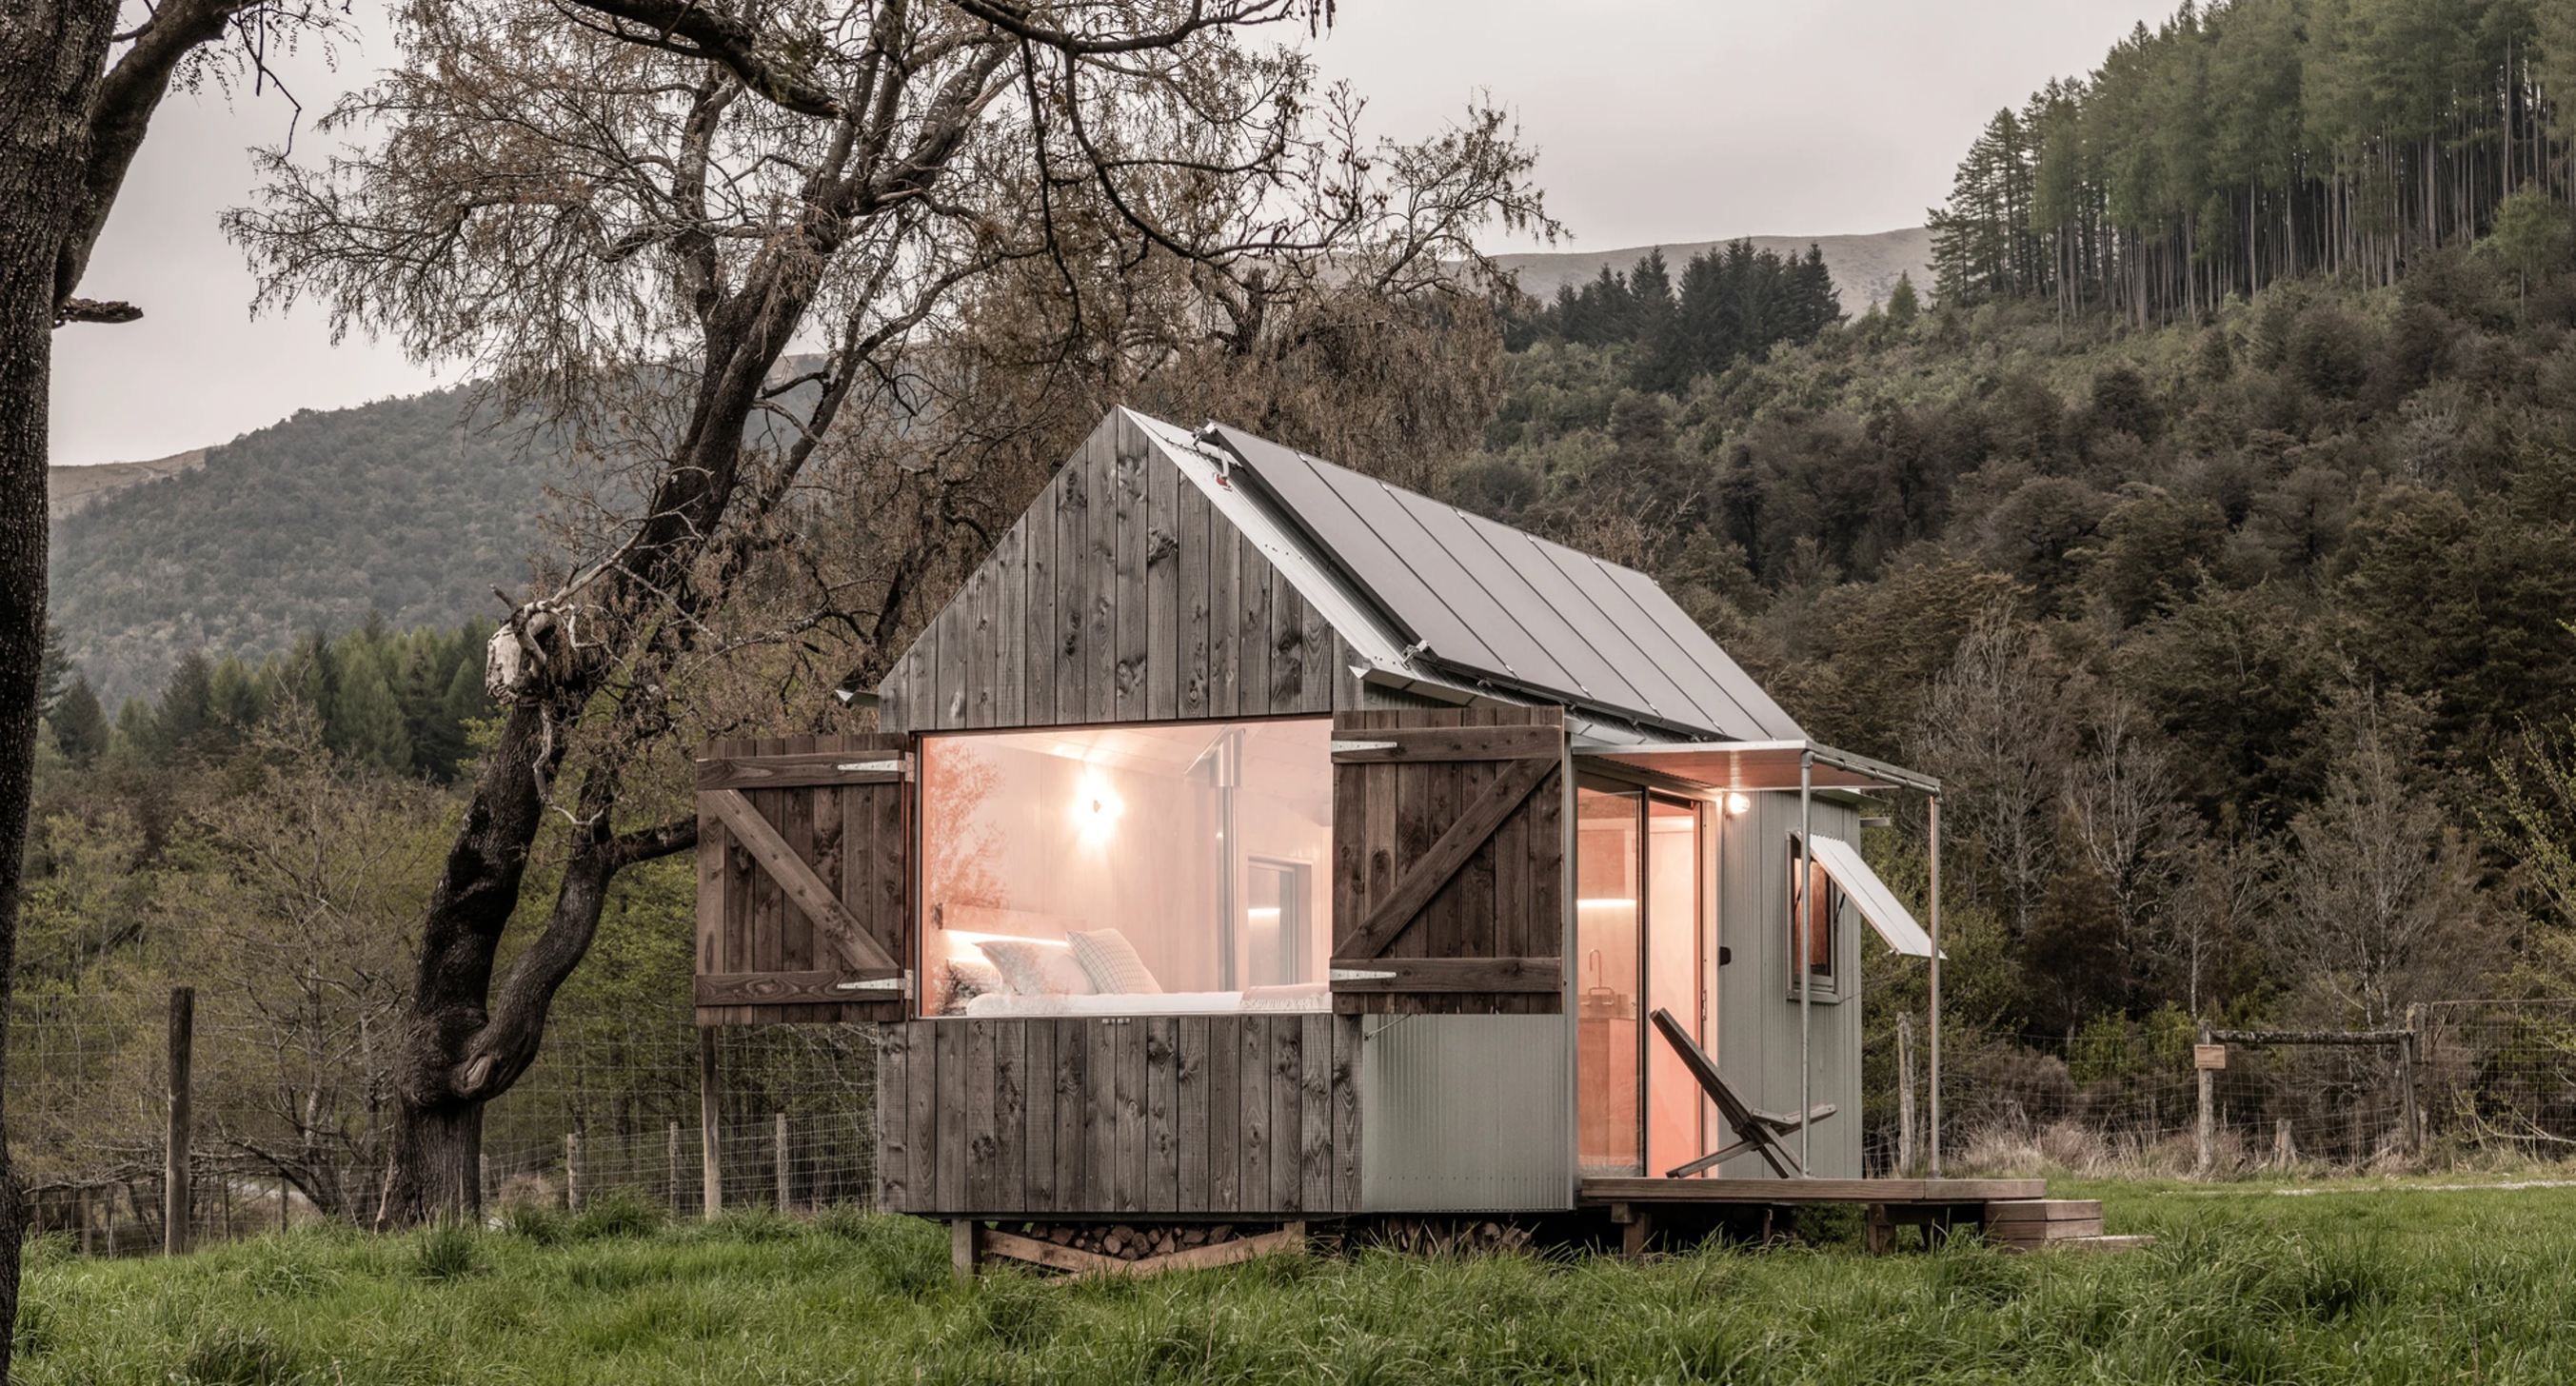 his off grid transportable tiny home in Pudding Hill, Canterbury, Kereru Retreat, was designed by Ben Comber of Studio Now. Image: Stephen Goodenough.